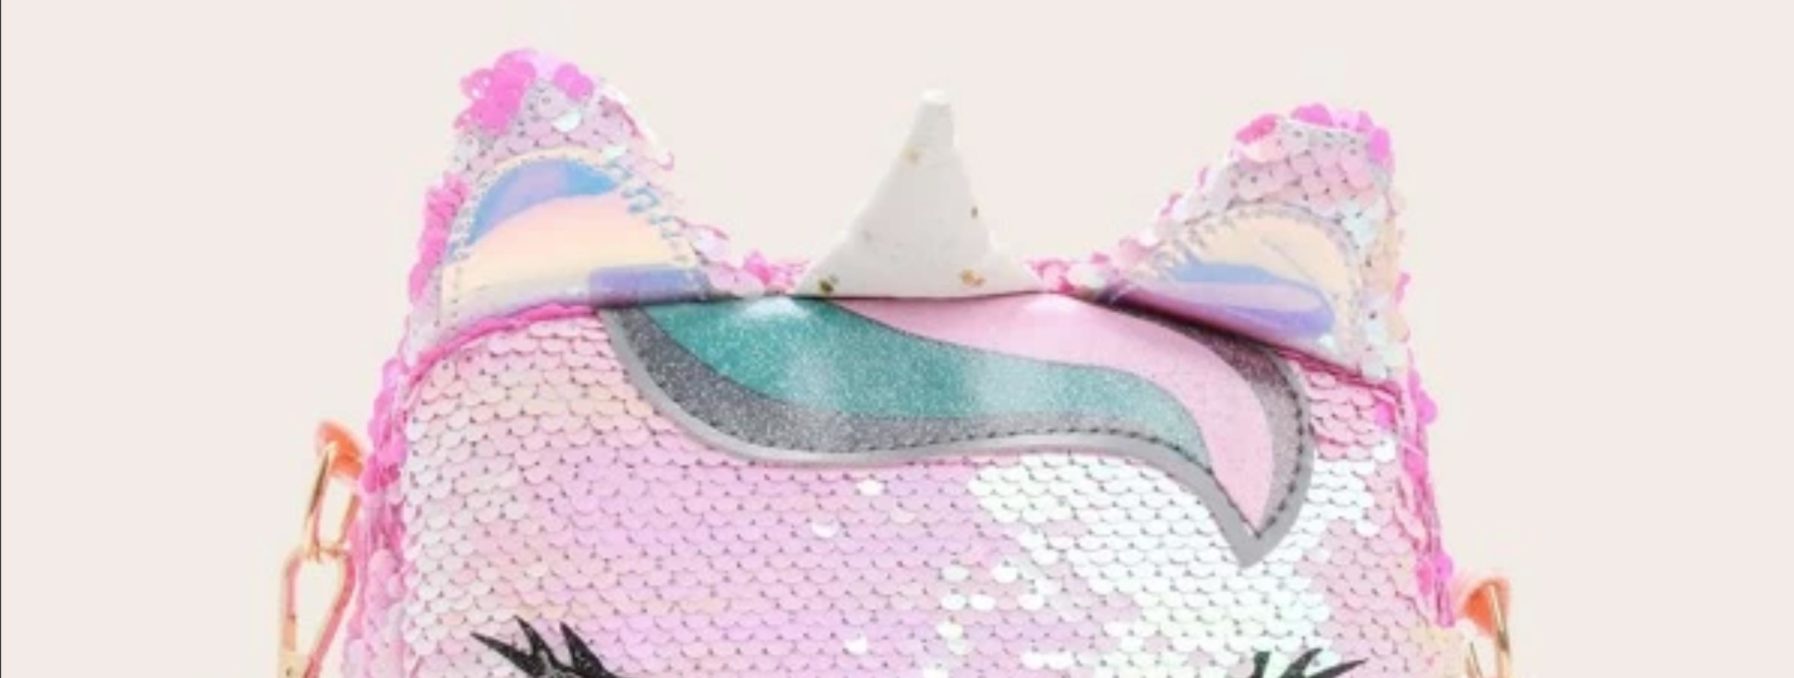 A photo of a pink sequined purse in the shape of a unicorn's head.